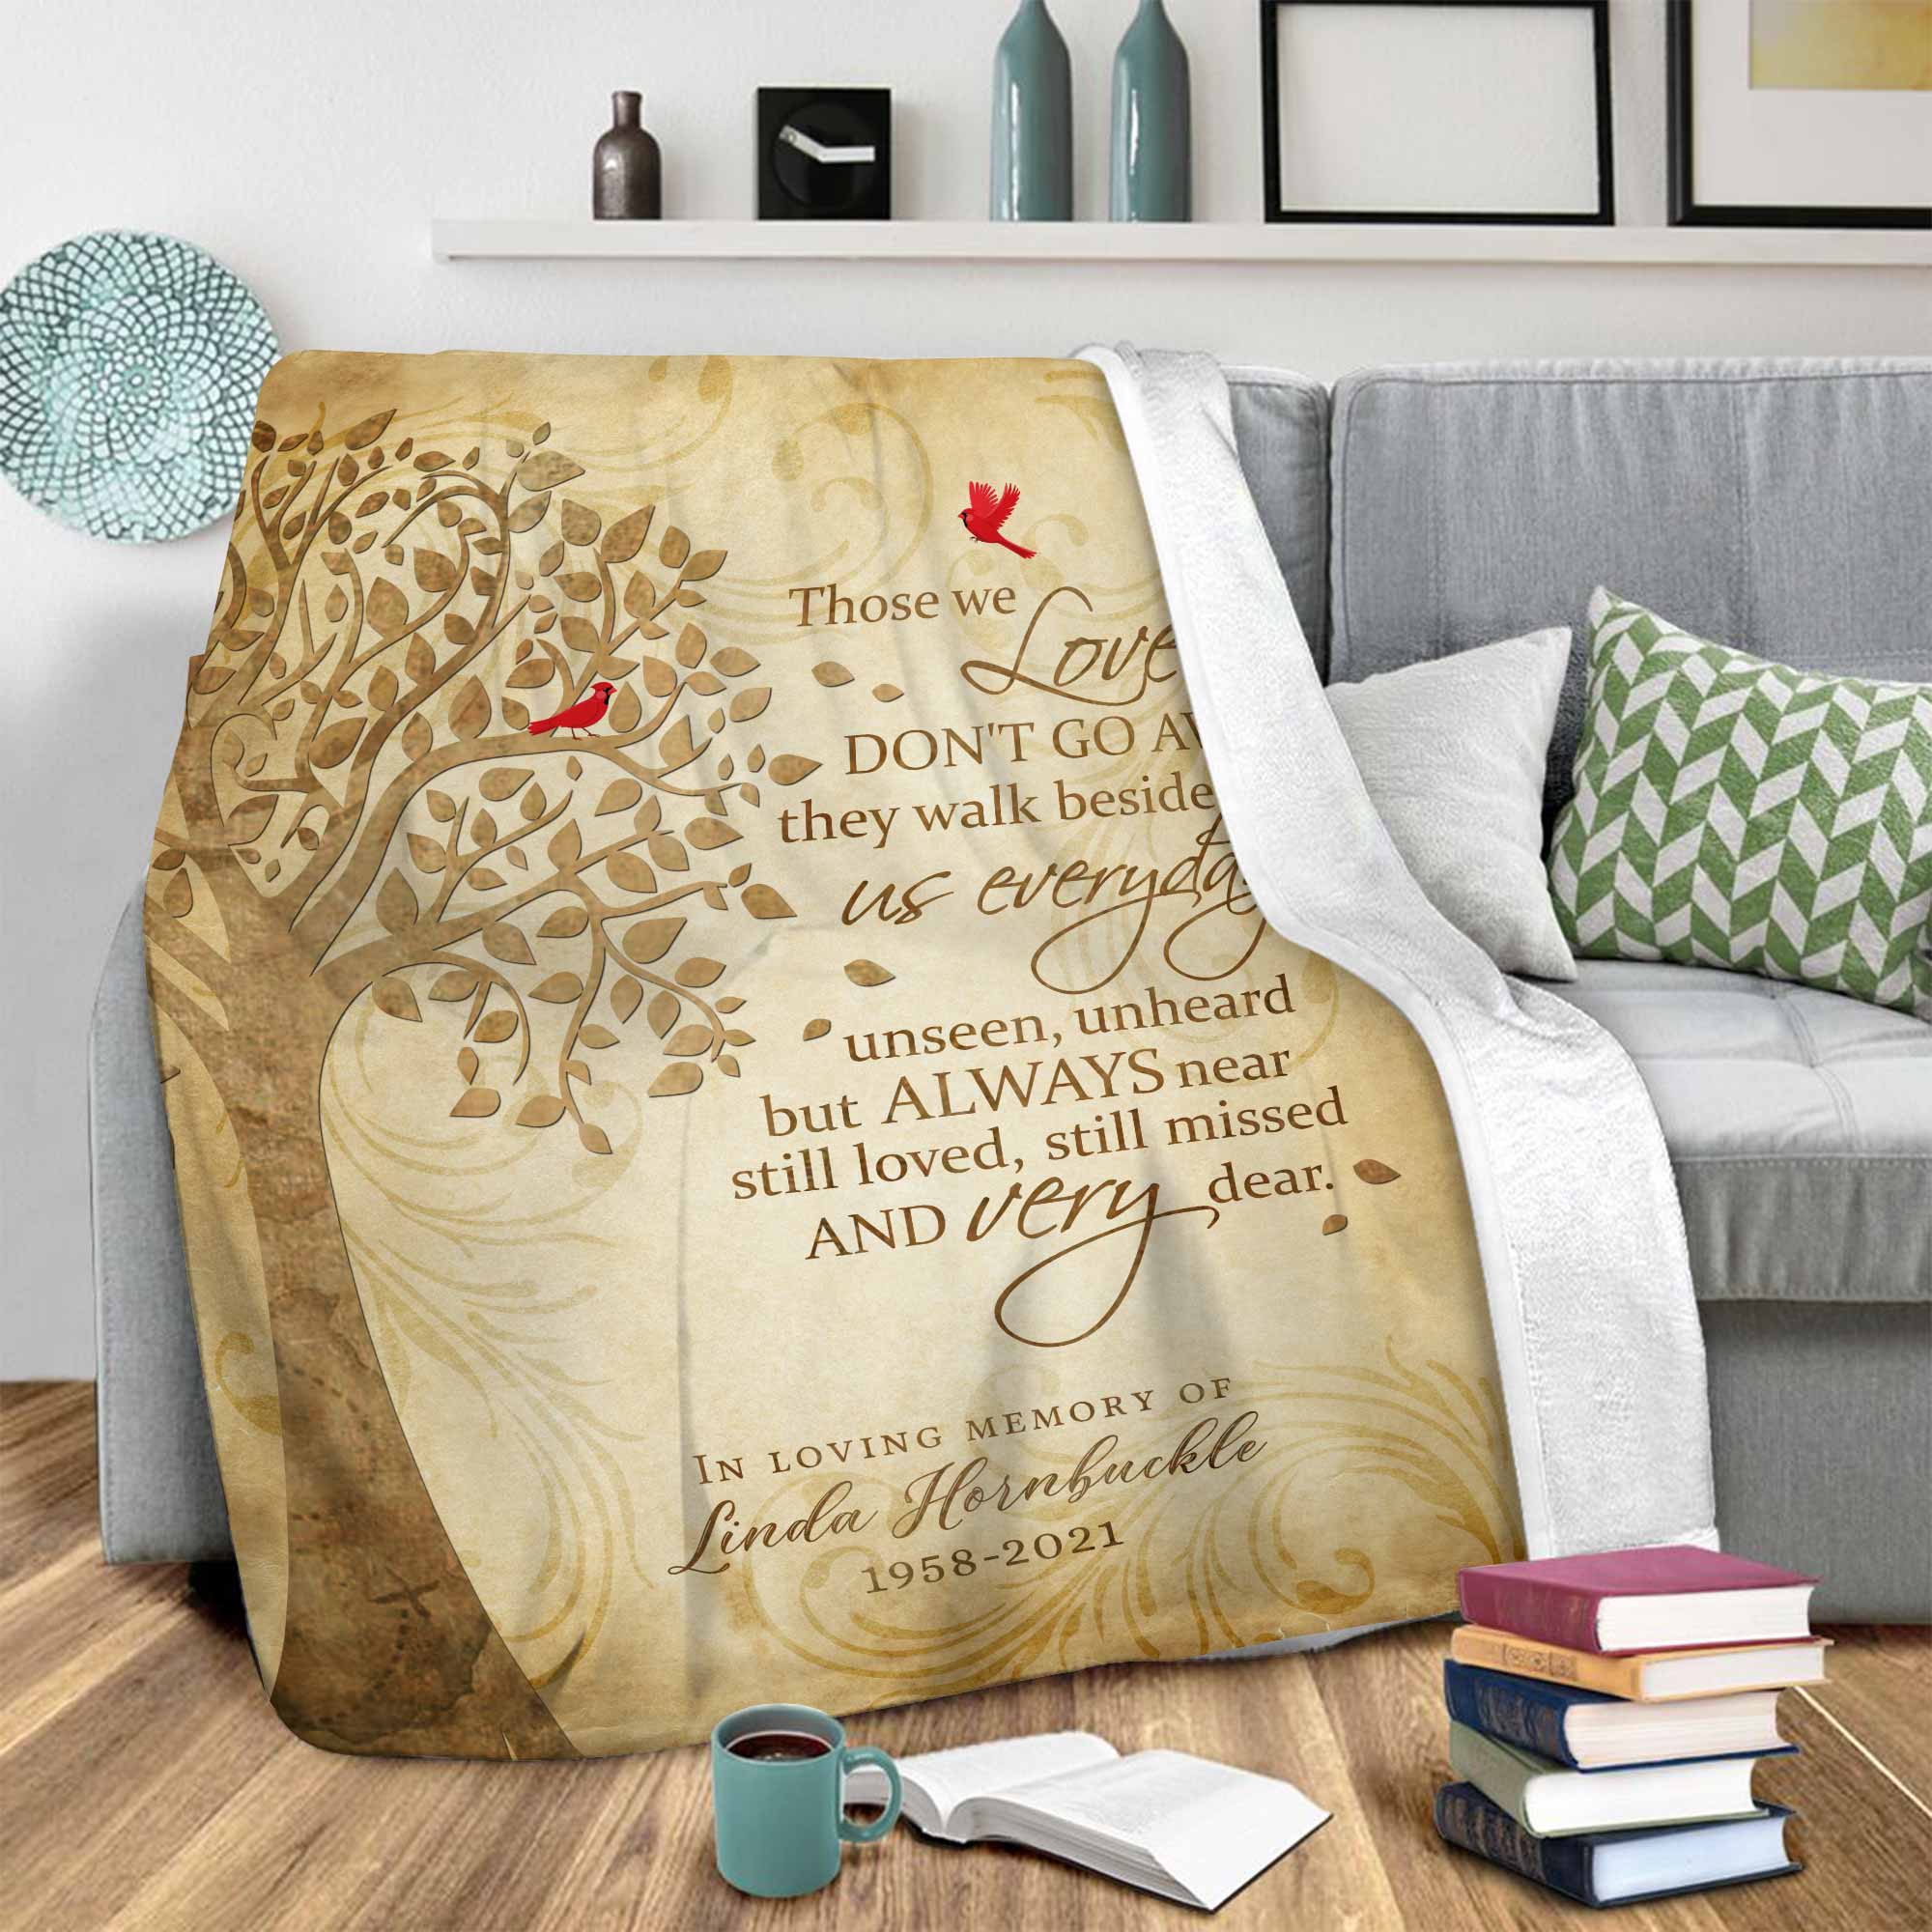 Personalized Red Cardinal Memorial Blankets, Those We Love Don't Go Away Sympathy Blankets, Remembrance Blanket